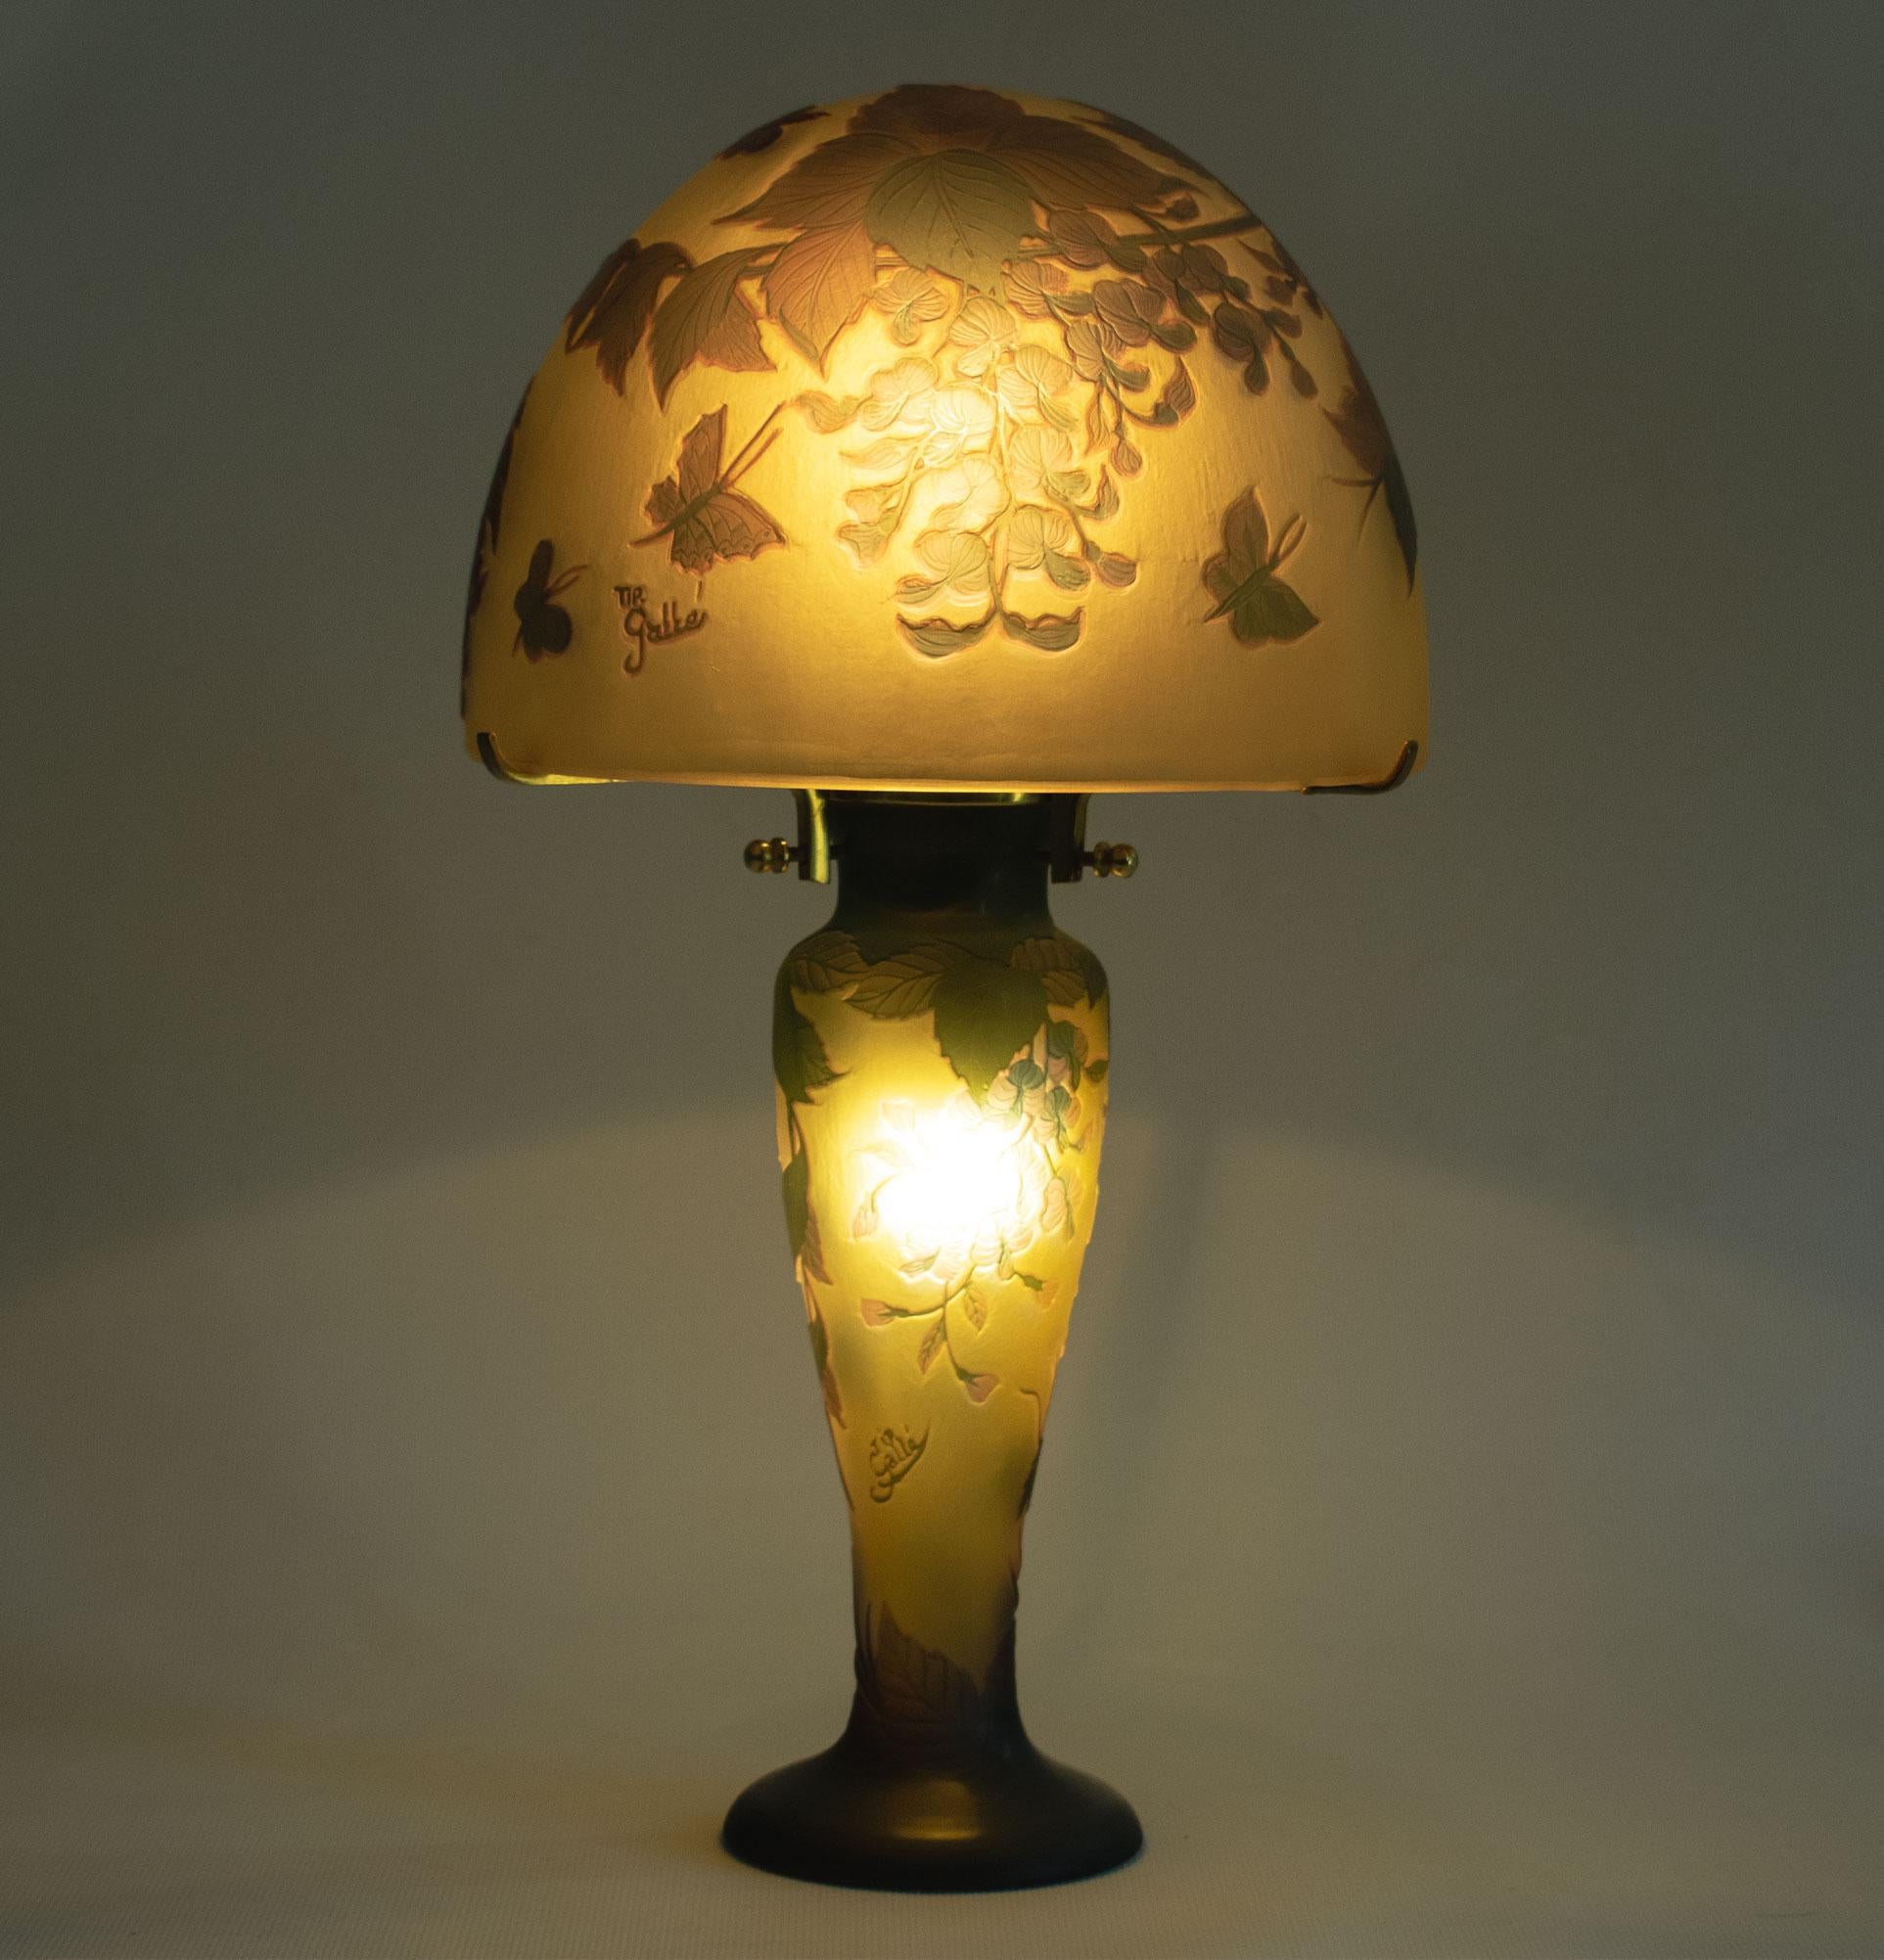 GALLÉ Tip - Elegant Art Nouveau mushroom lamp in acid-etched glass decorated with wisteria and butterflies in muted tones of violet and green on an ochre background. Height. 35cm. Diameter of lampshade: 19 cm. 

Lamp signed “Gallé”, accompanied by a